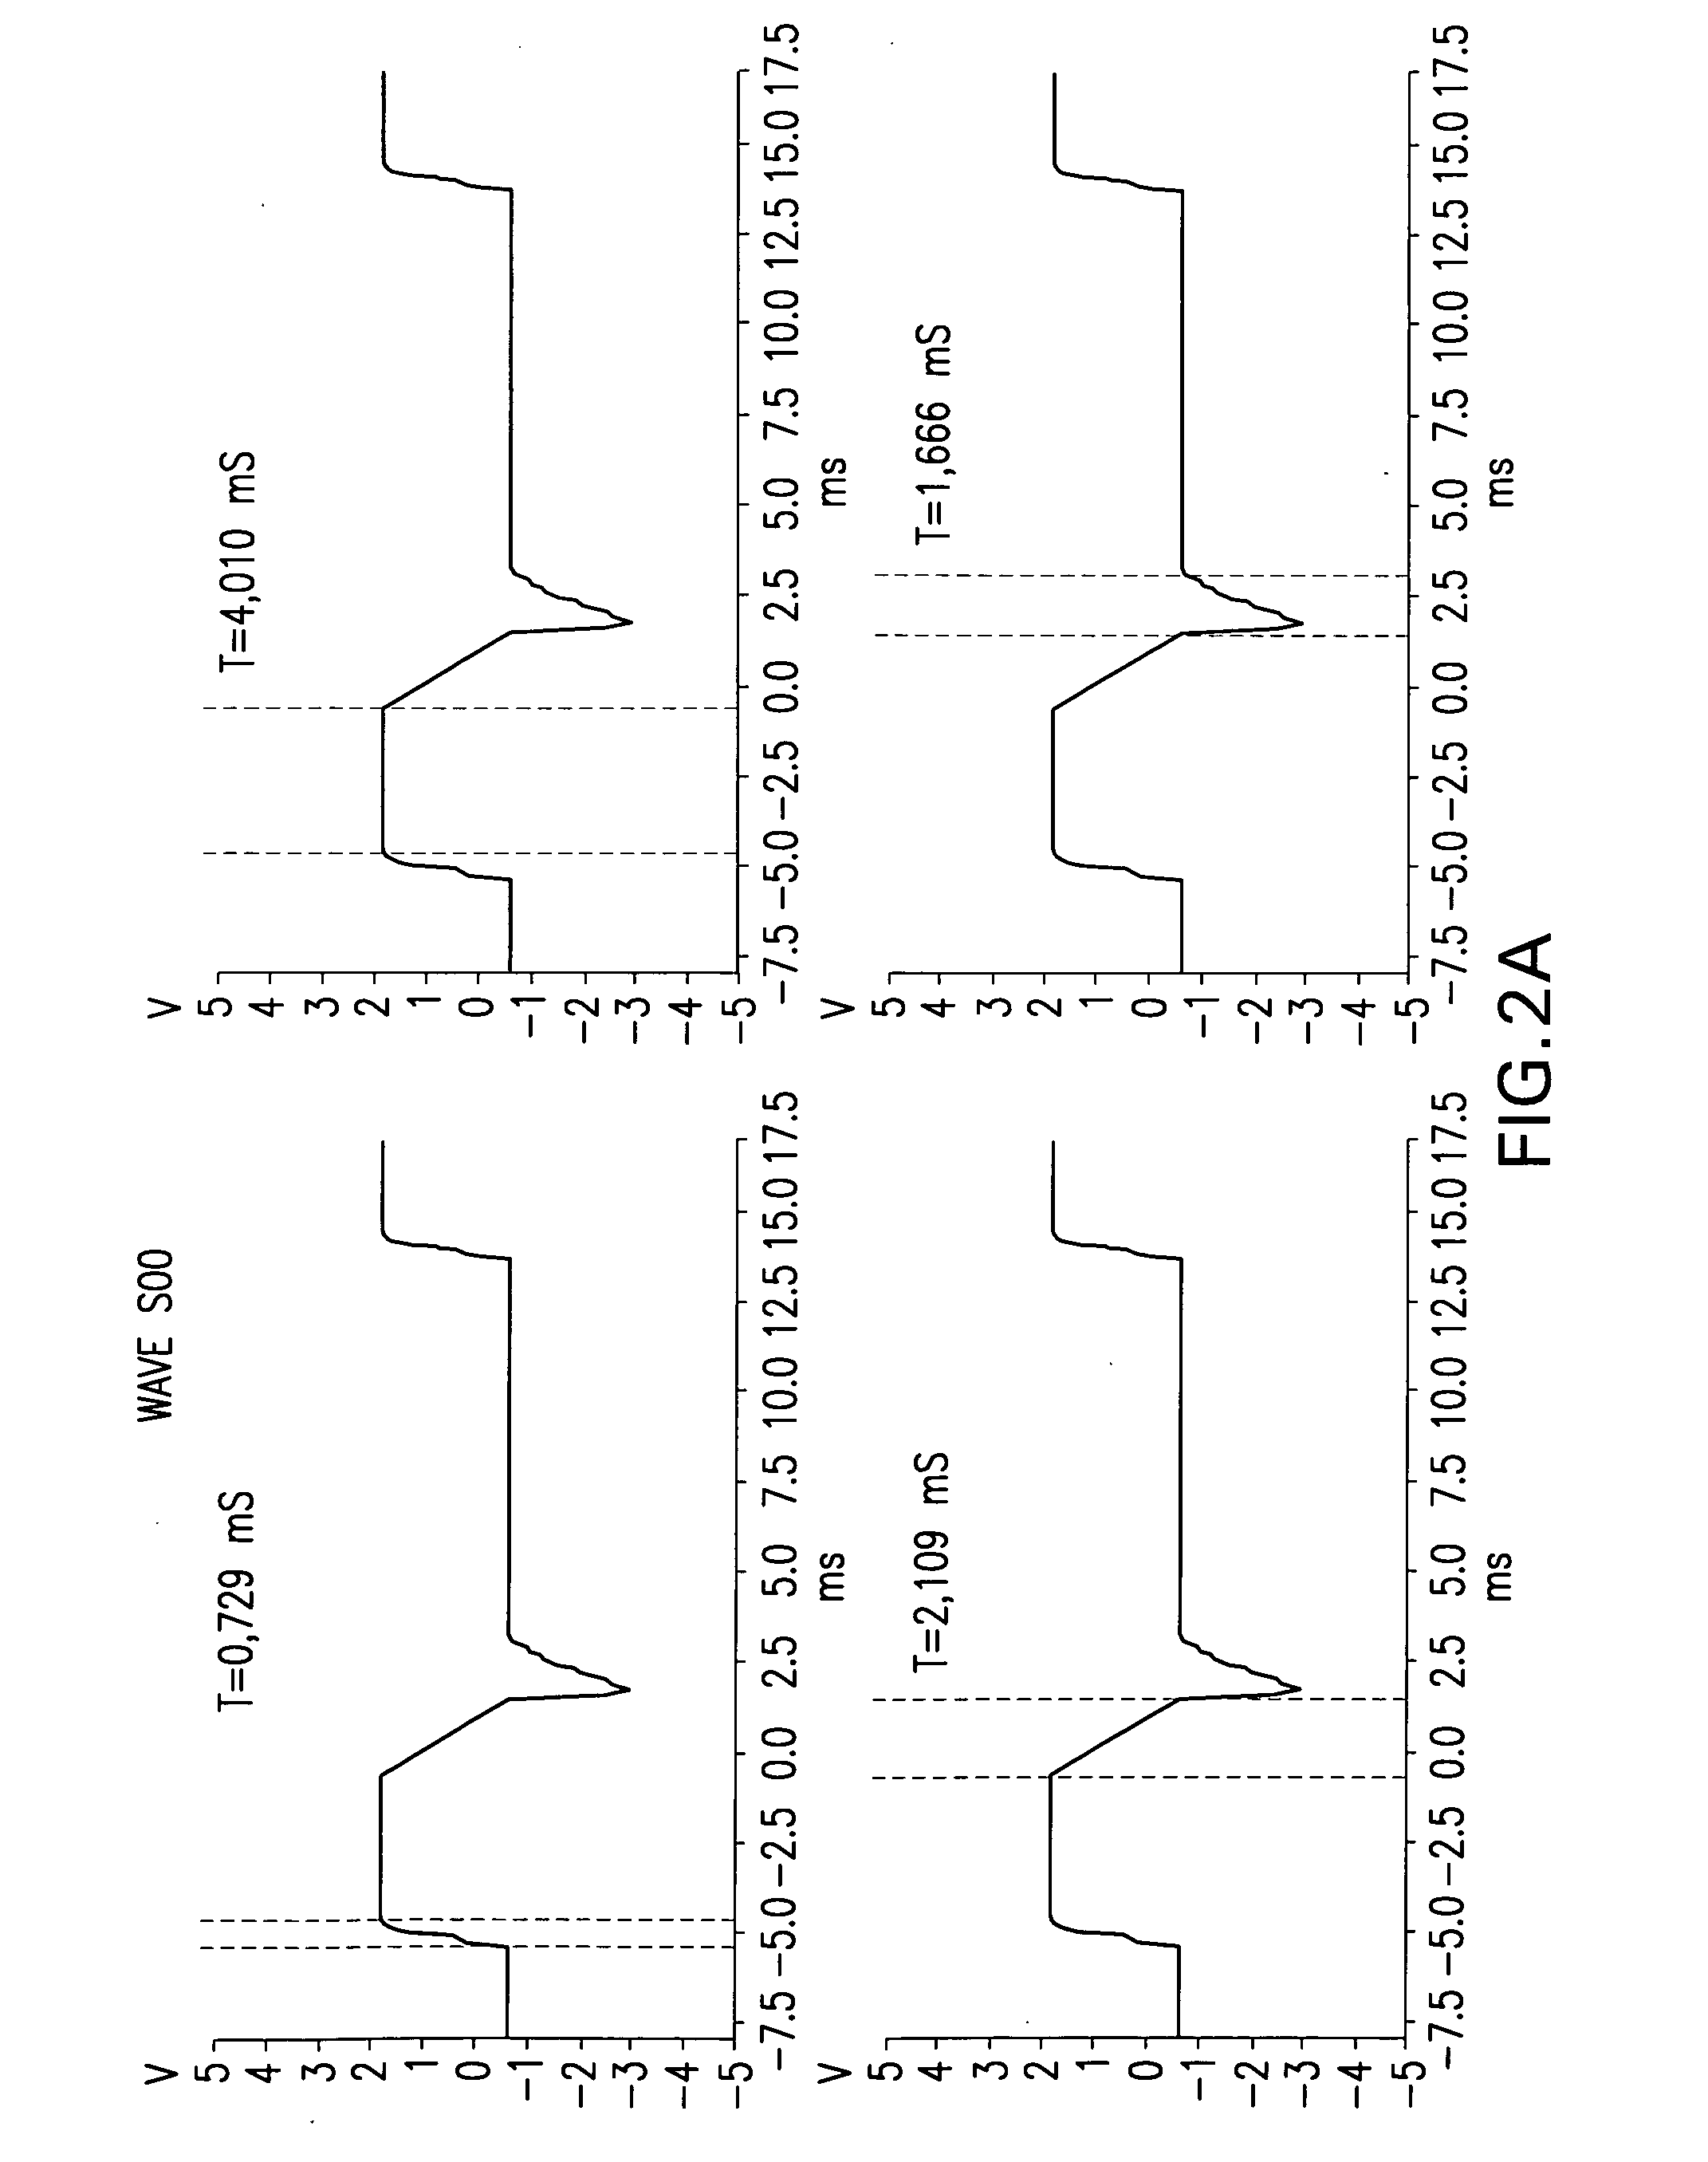 Apparatus and method for quick pain suppression